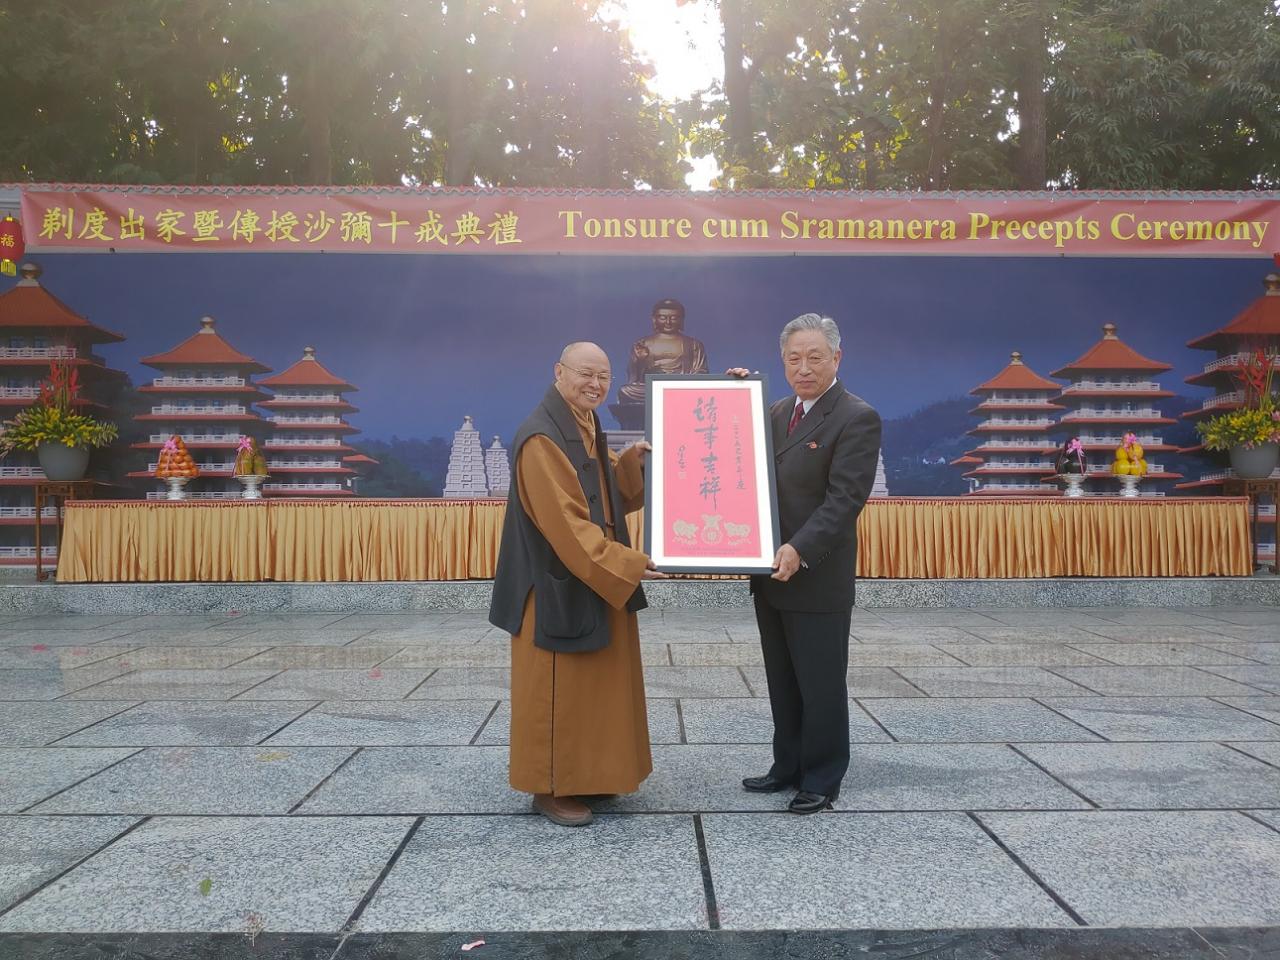 Venerable Hsin Ting (left) presented a calligraphy written by Venerable Master Hsing Yun to Amb. Tien.